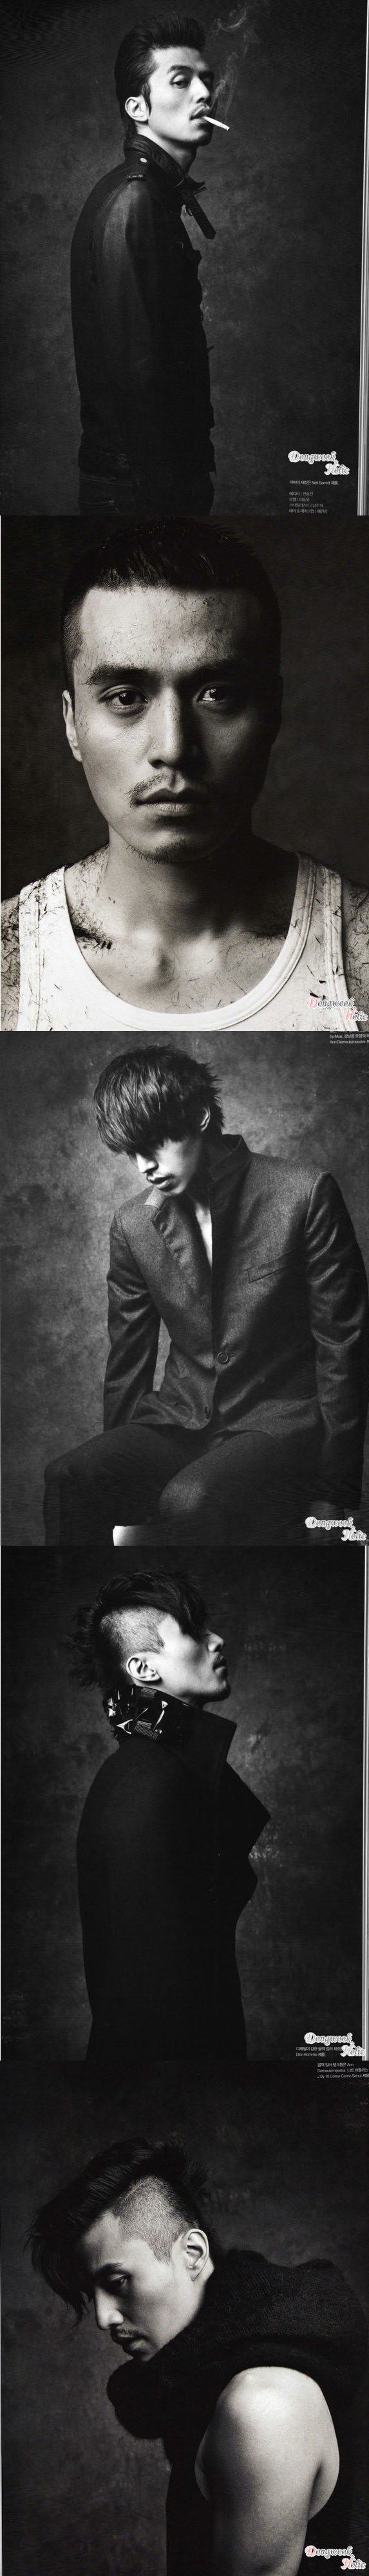 Lee Dong Wook Images - Photos